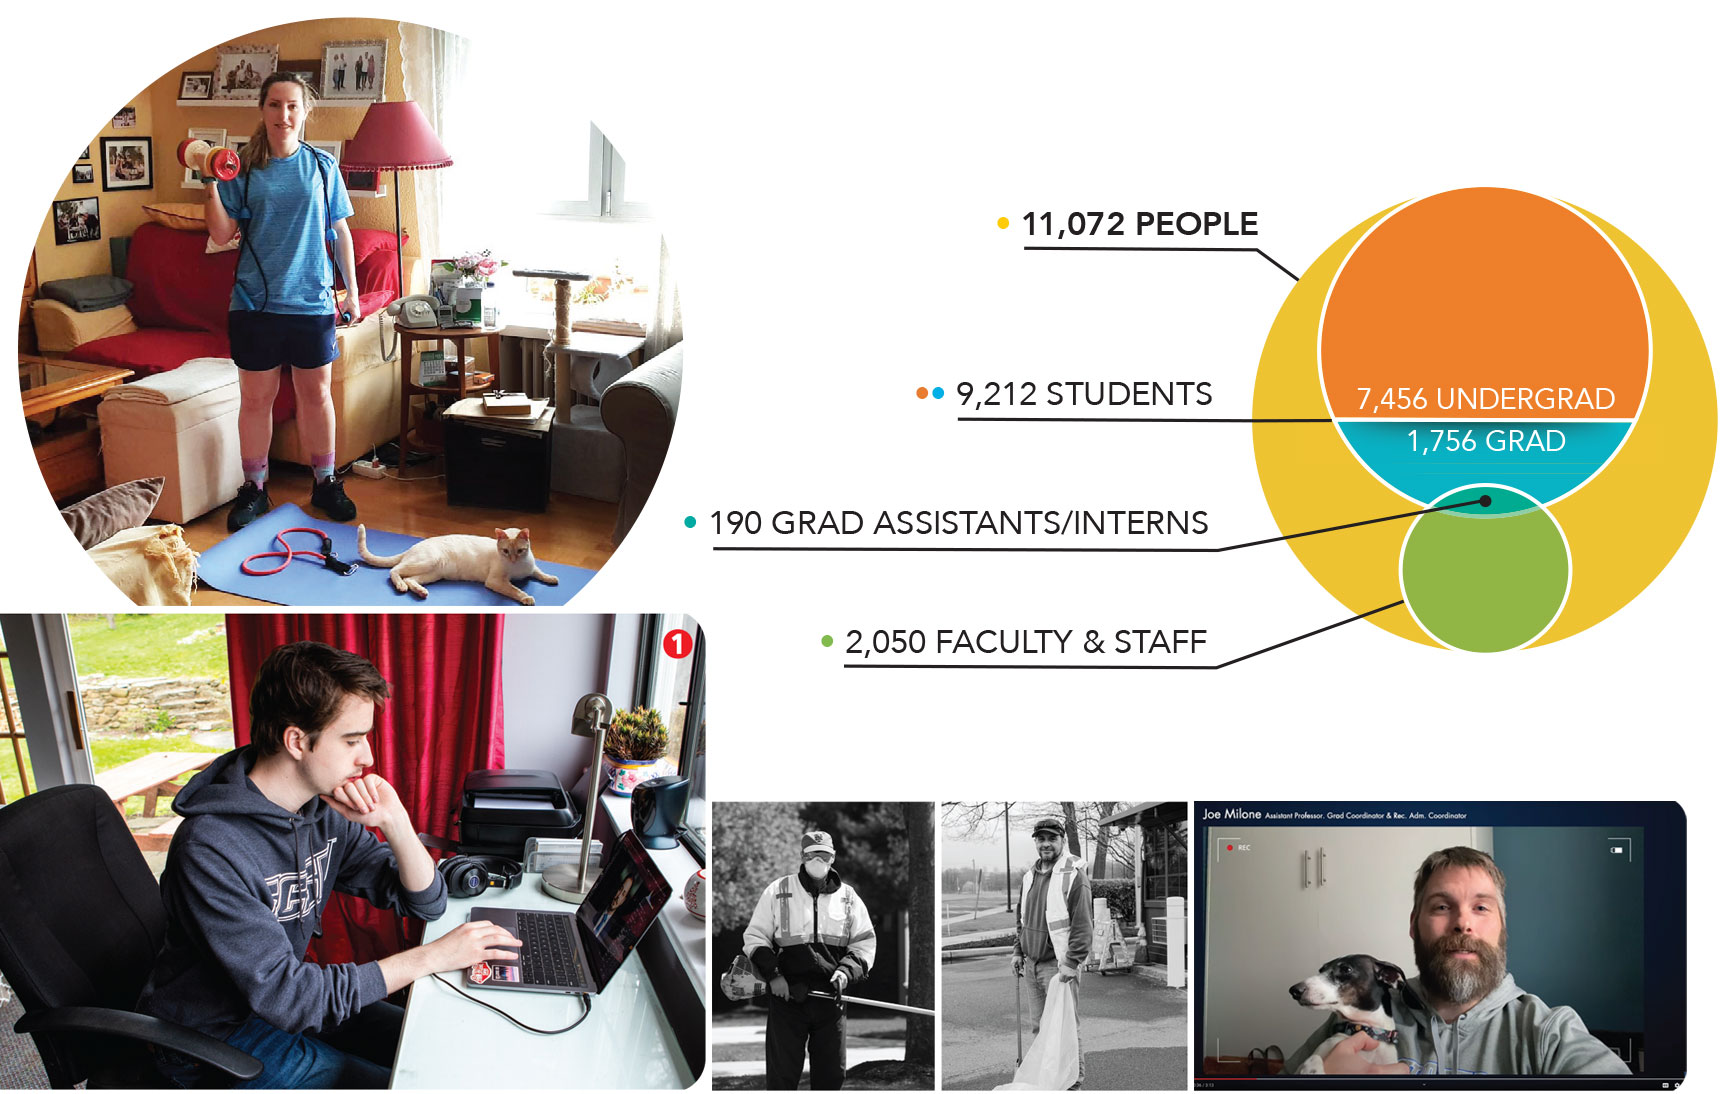 Demographic of SCSU students, Grad assistants/interns/faculty/staff, with collage images